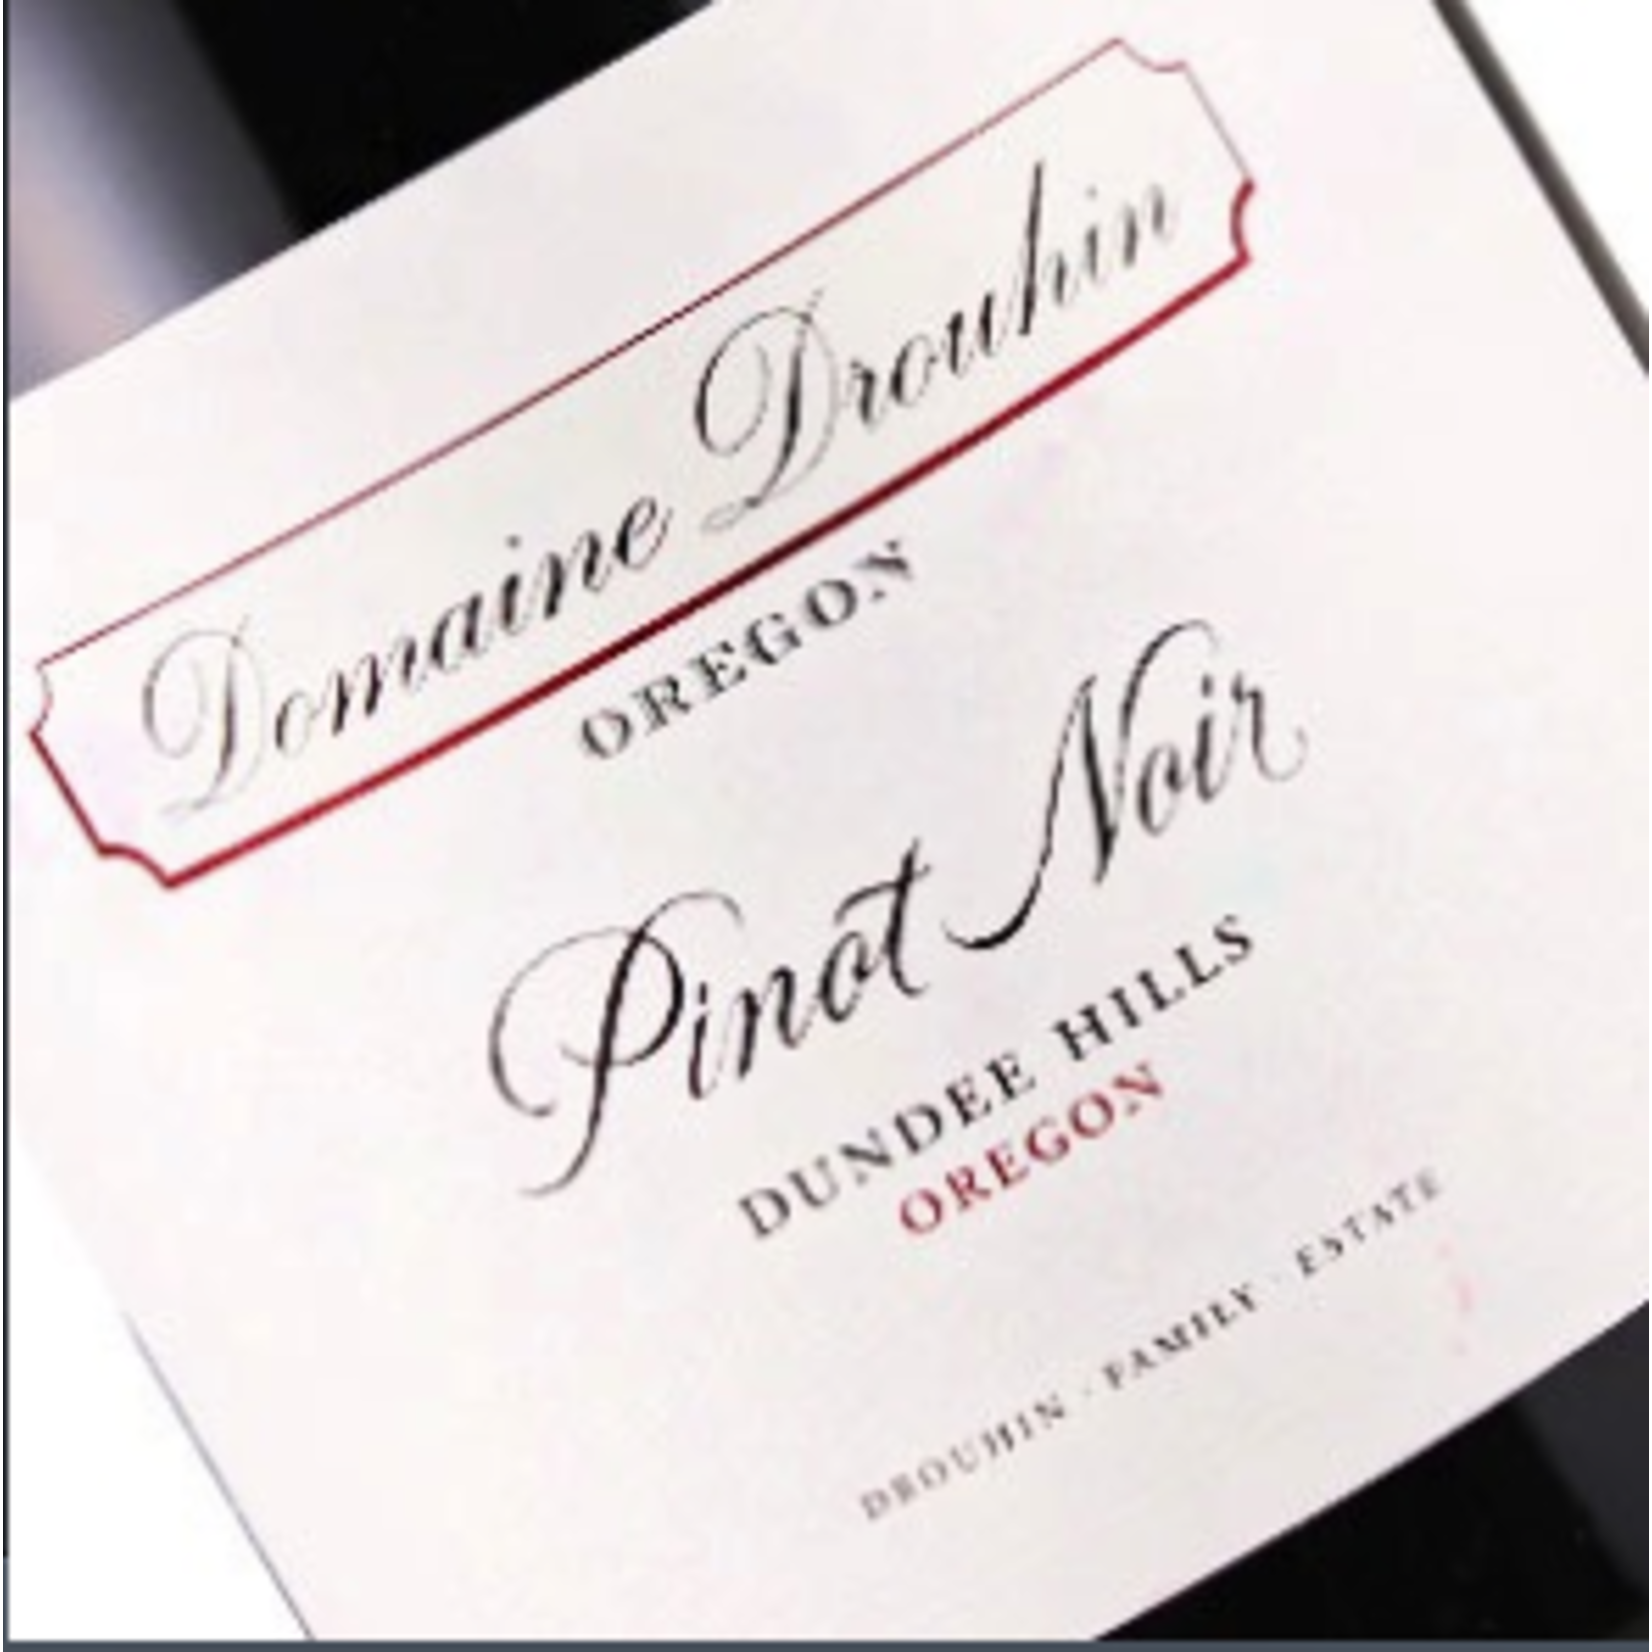 Drouhin Family Estate Domaine Drouhin Dundee Hills Pinot Noir 2019 Dundee Hills, Willamette Valley, Oregon